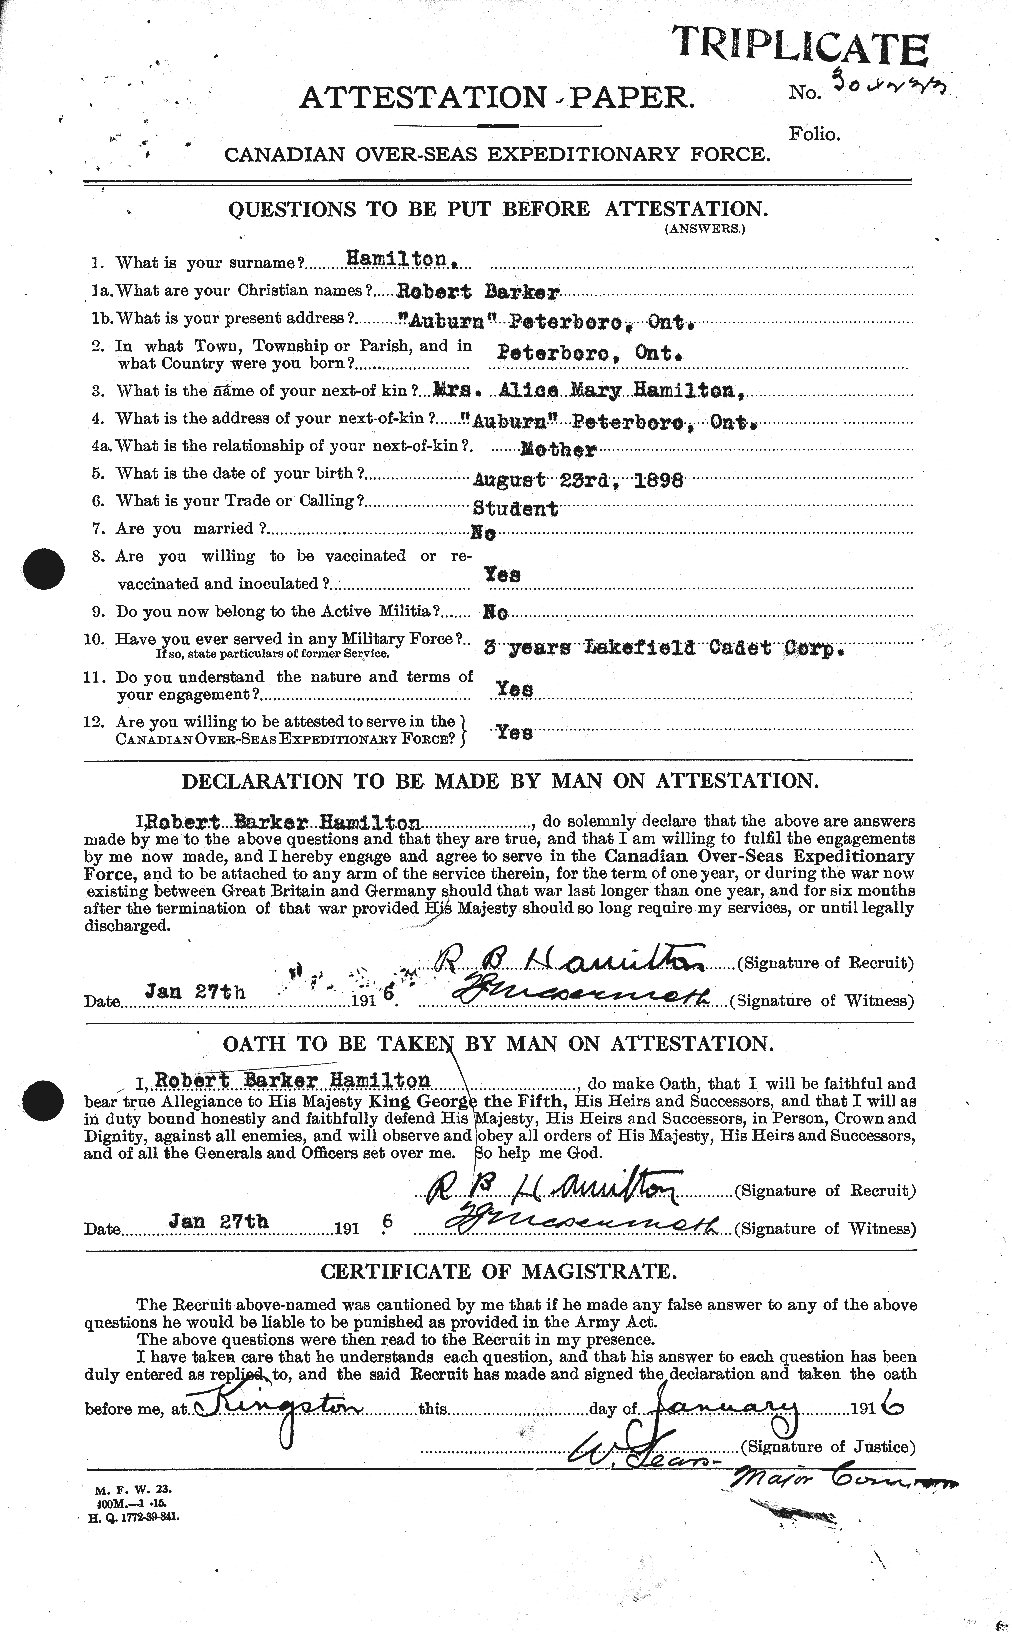 Personnel Records of the First World War - CEF 373253a